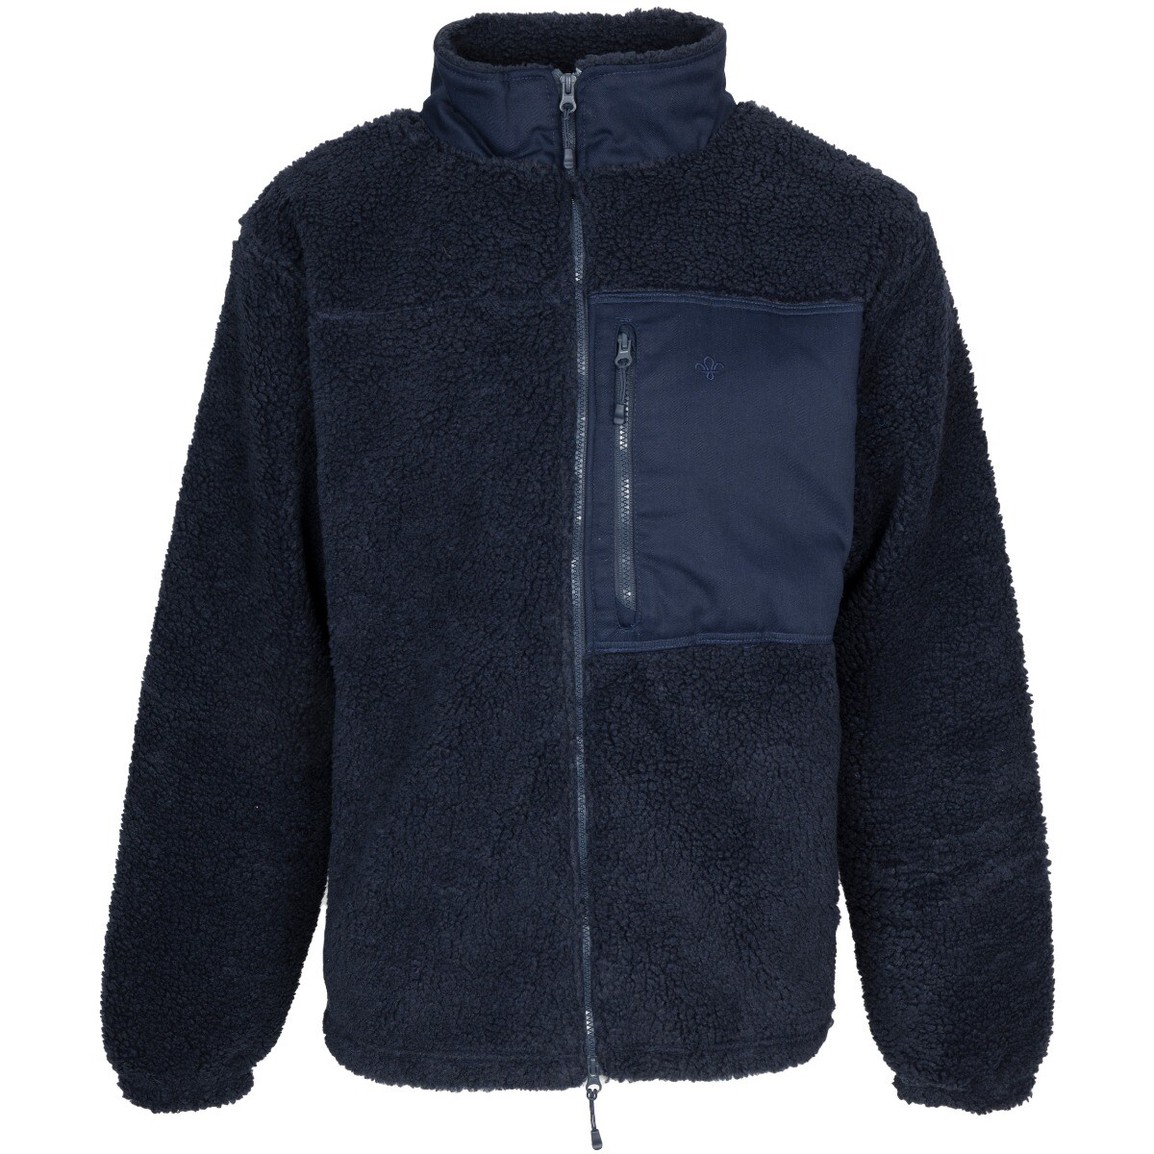 Scouts FDL Recycled Polyester Sherpa Fleece Jacket | Eco Friendly Outlet